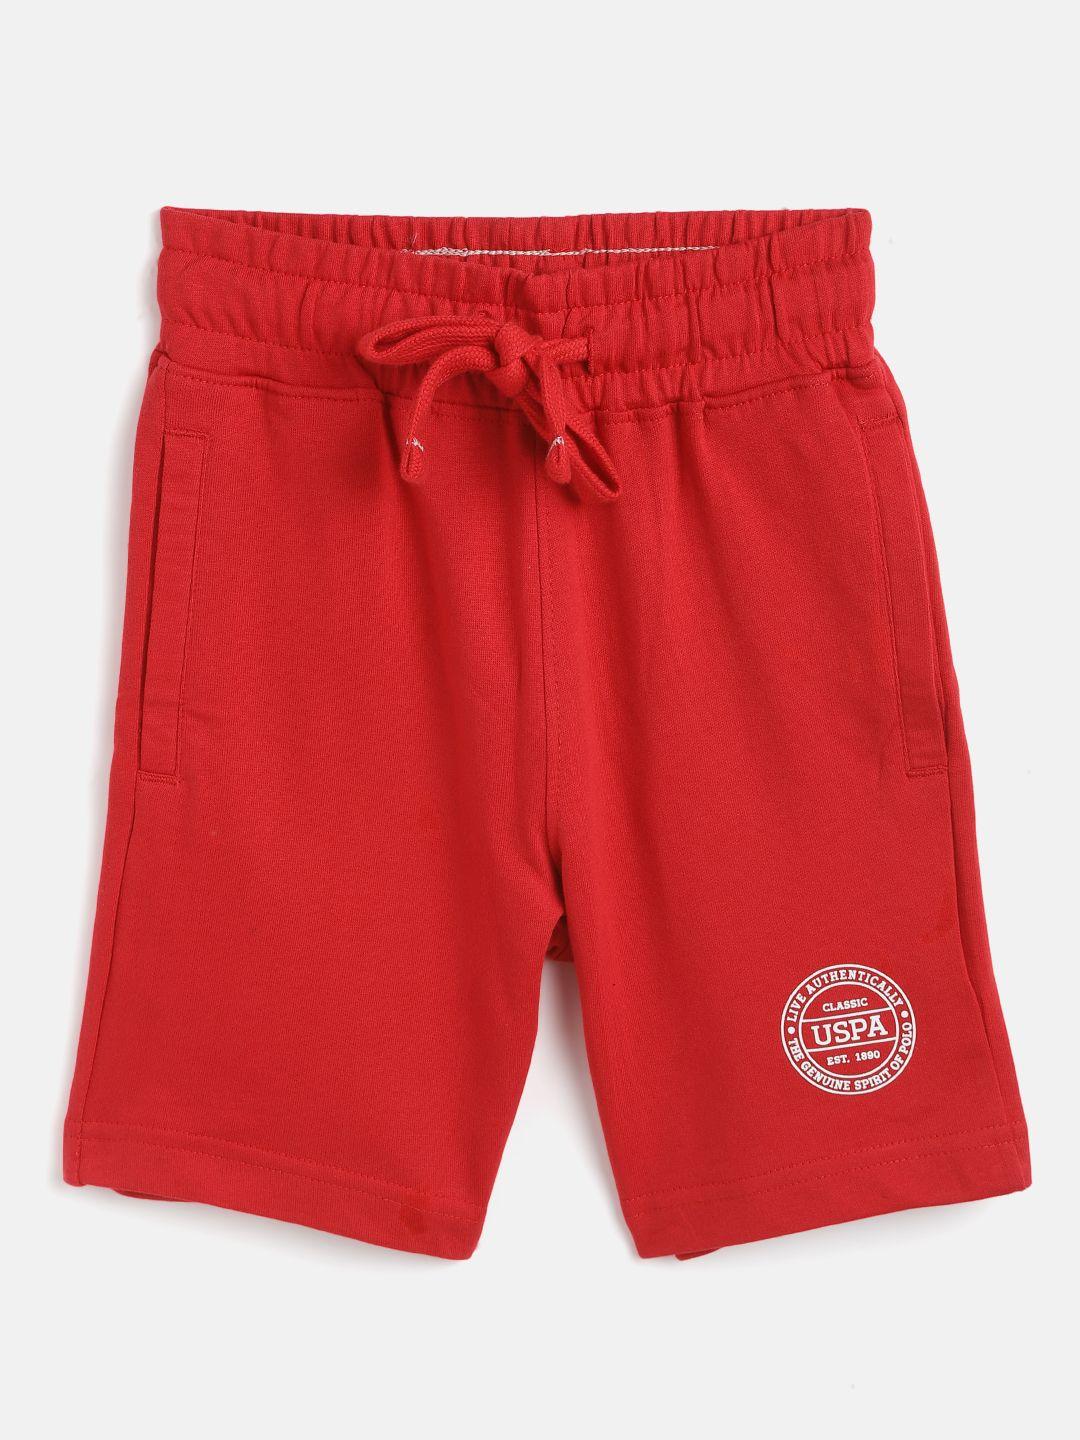 u.s. polo assn. kids boys red cotton solid lounge shorts